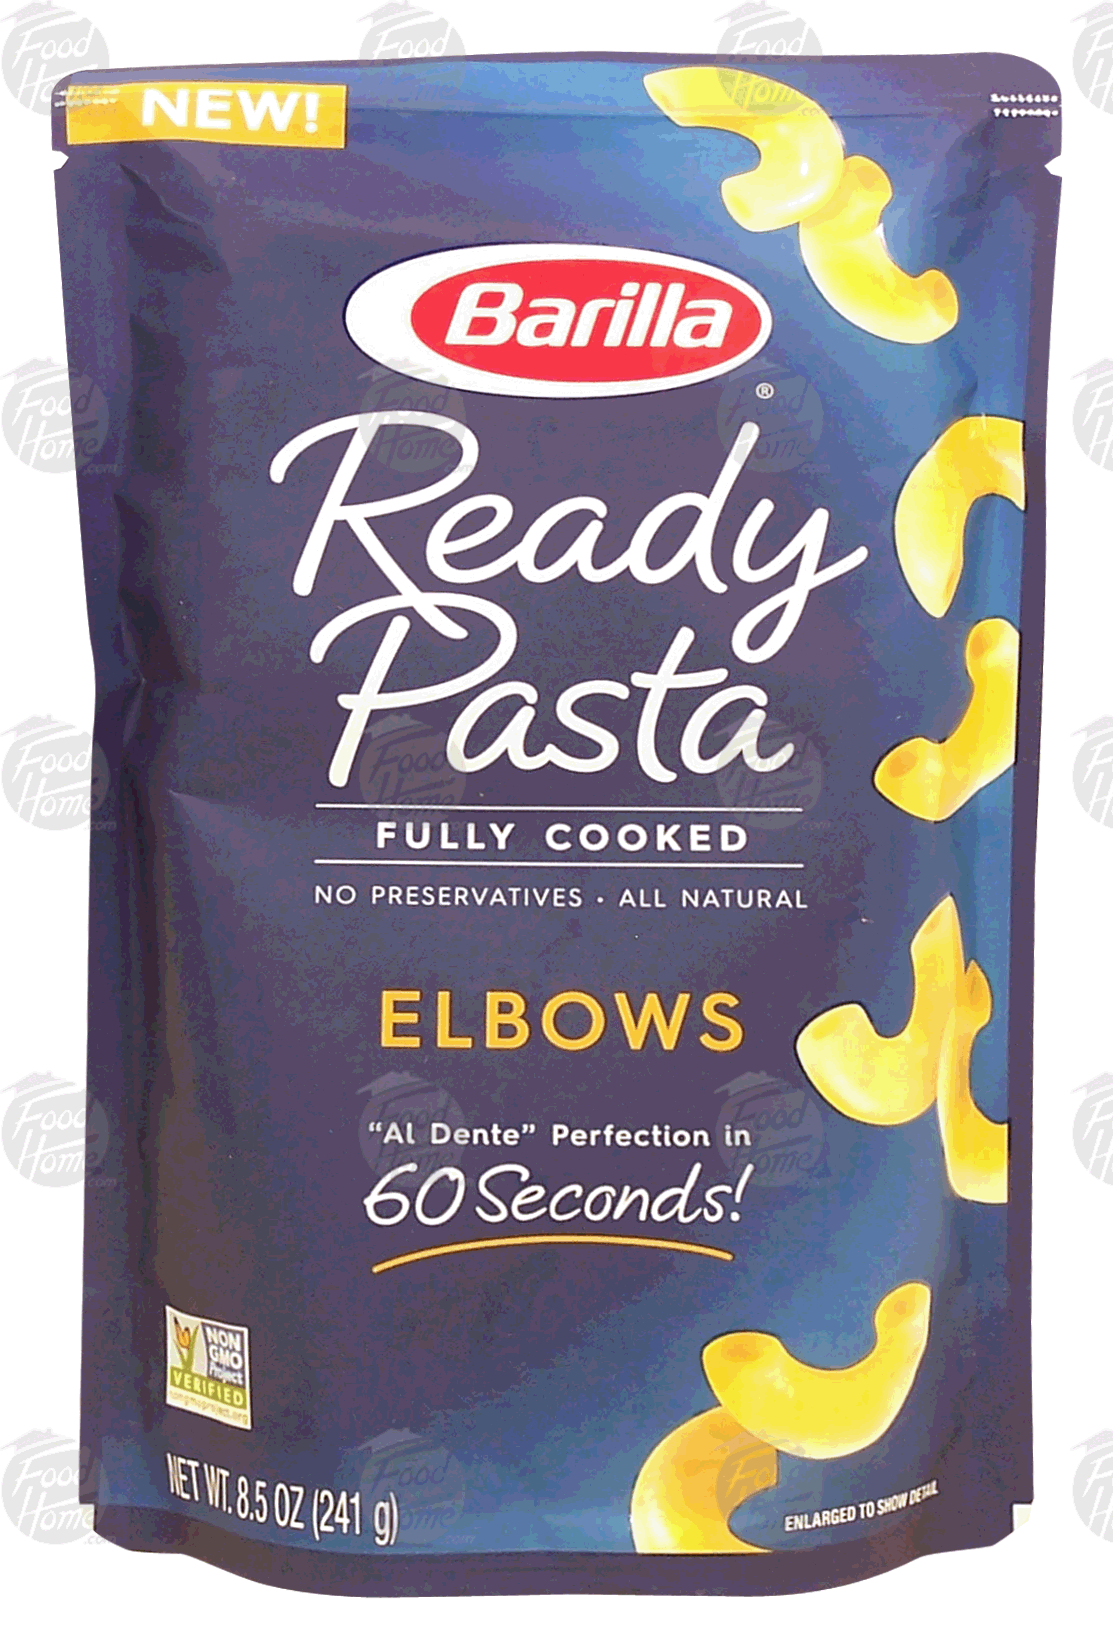 Barilla Ready Pasta elbows, fully cooked Full-Size Picture